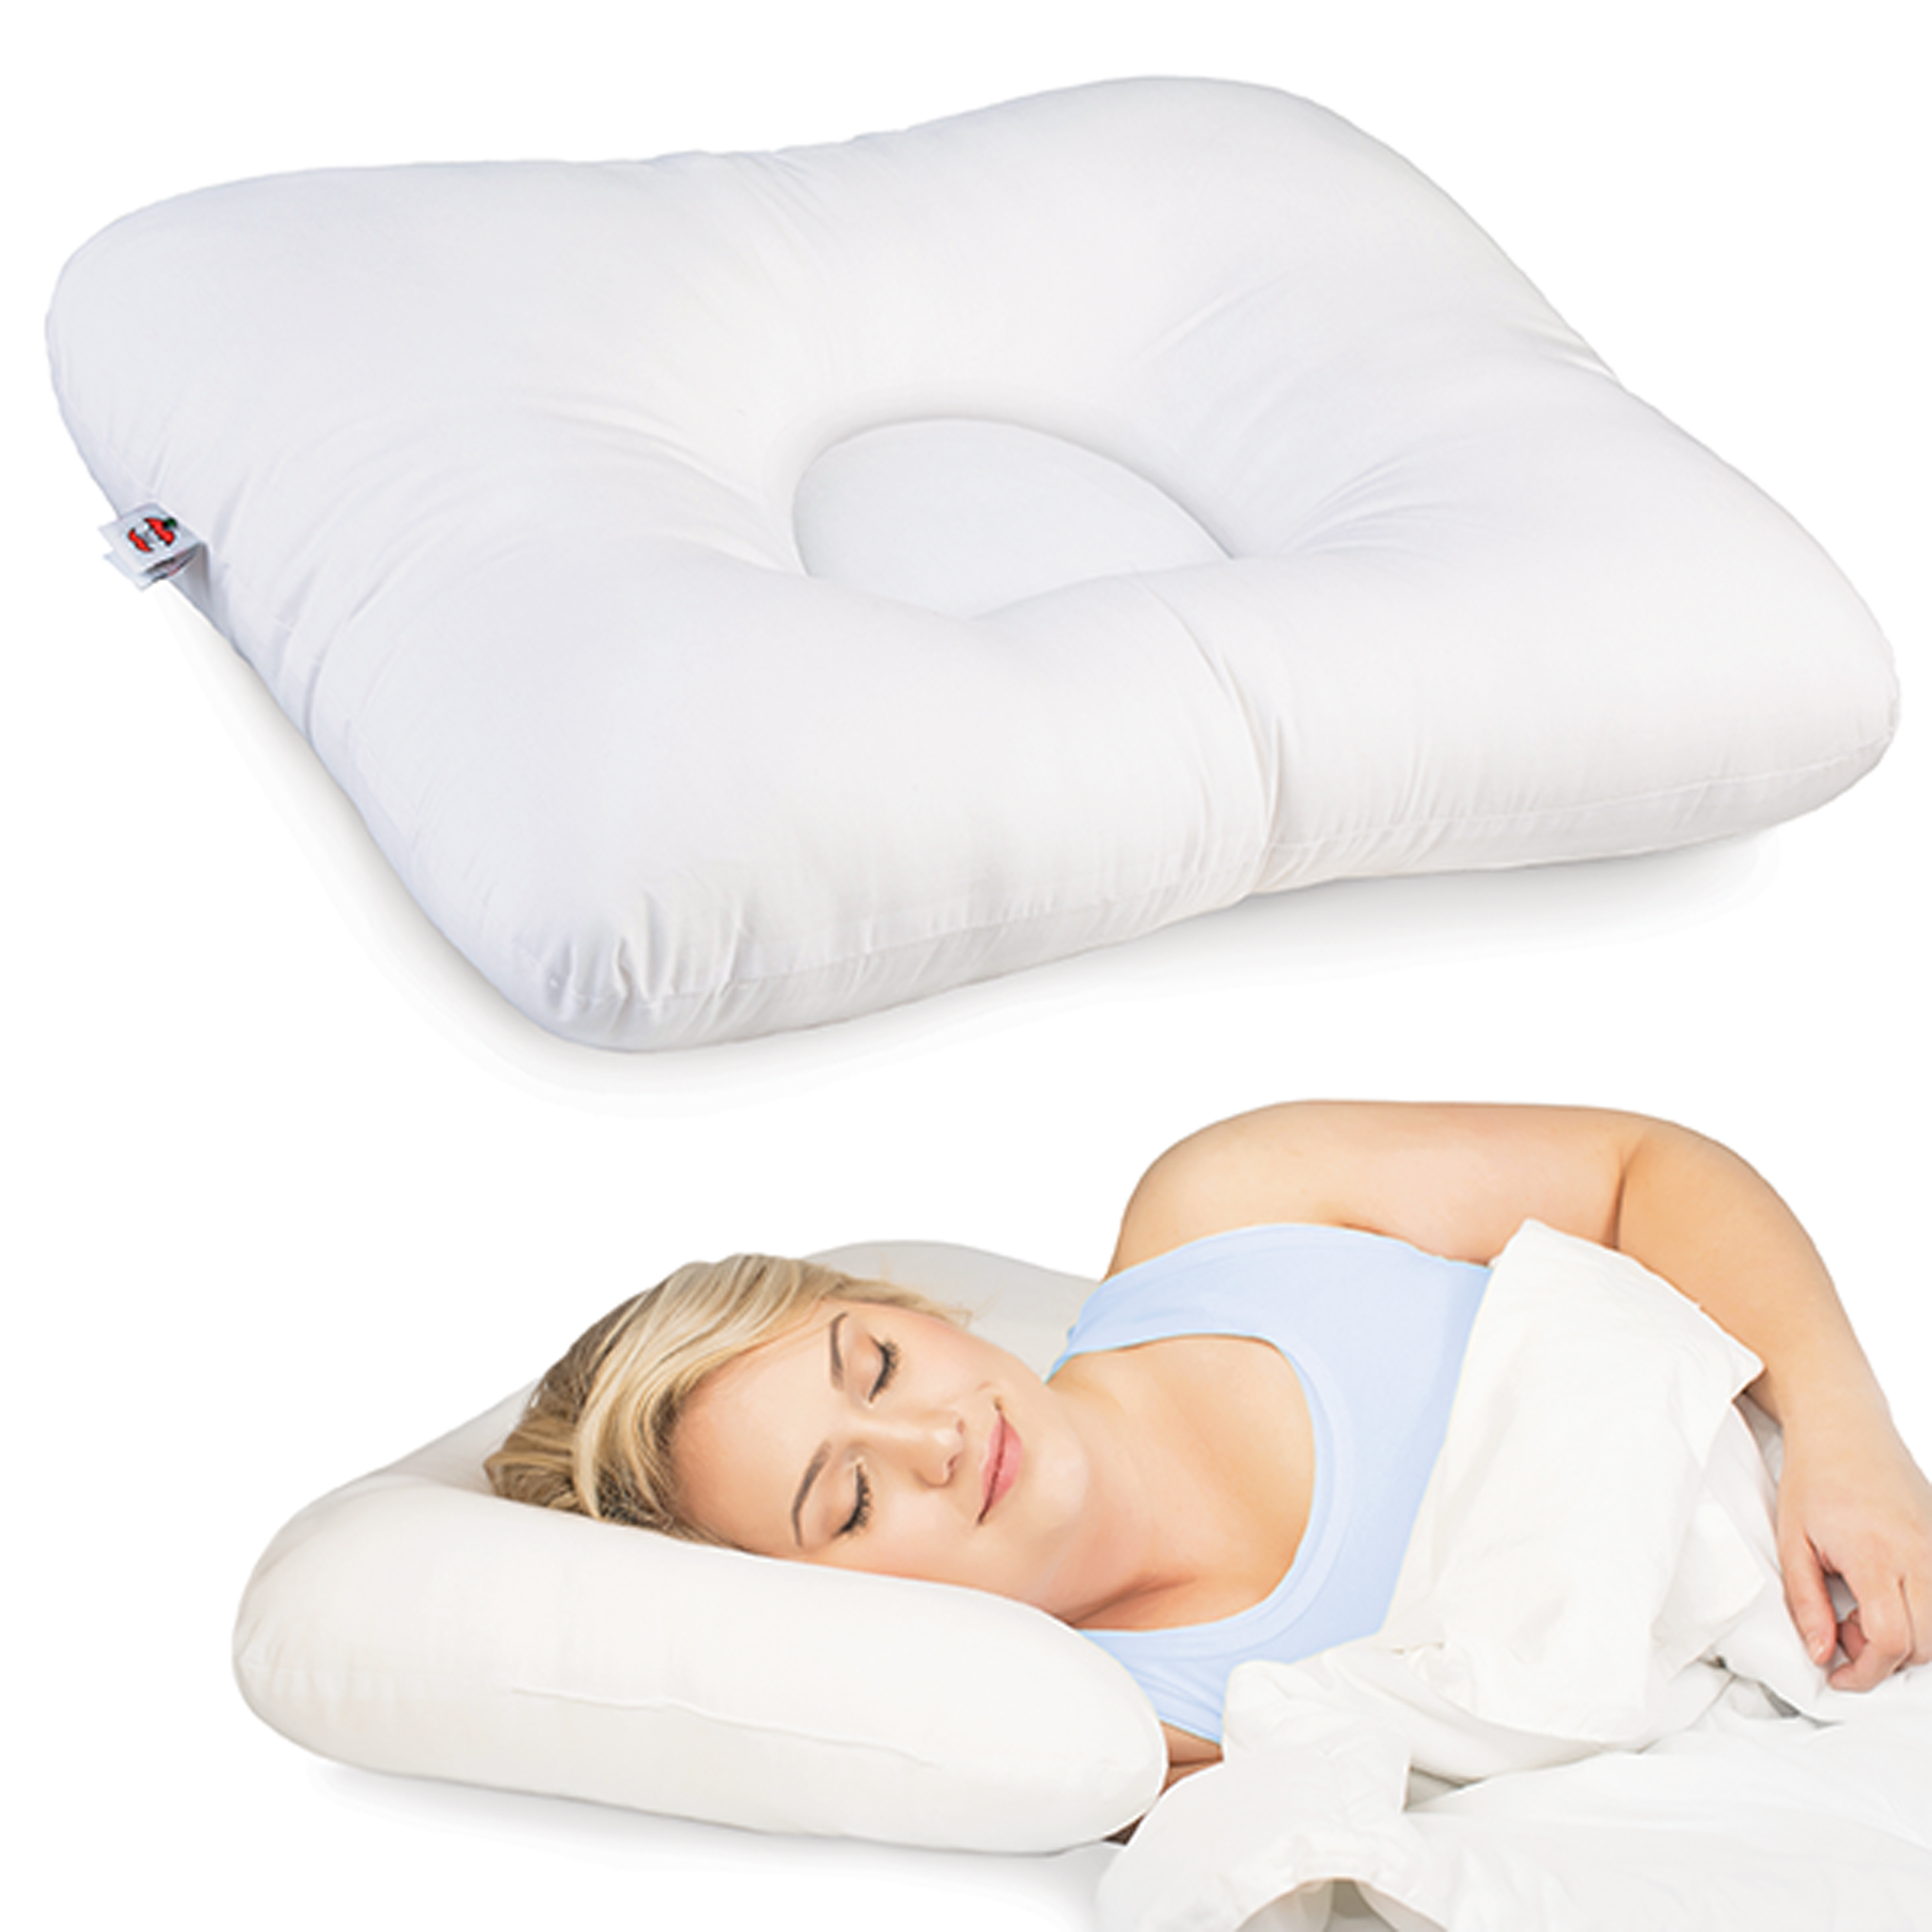 Core Products D-Core Cervical Spine Support Pillow- Ease Neck Spasms, Tension & Headaches- Full Size Firm - image 1 of 7